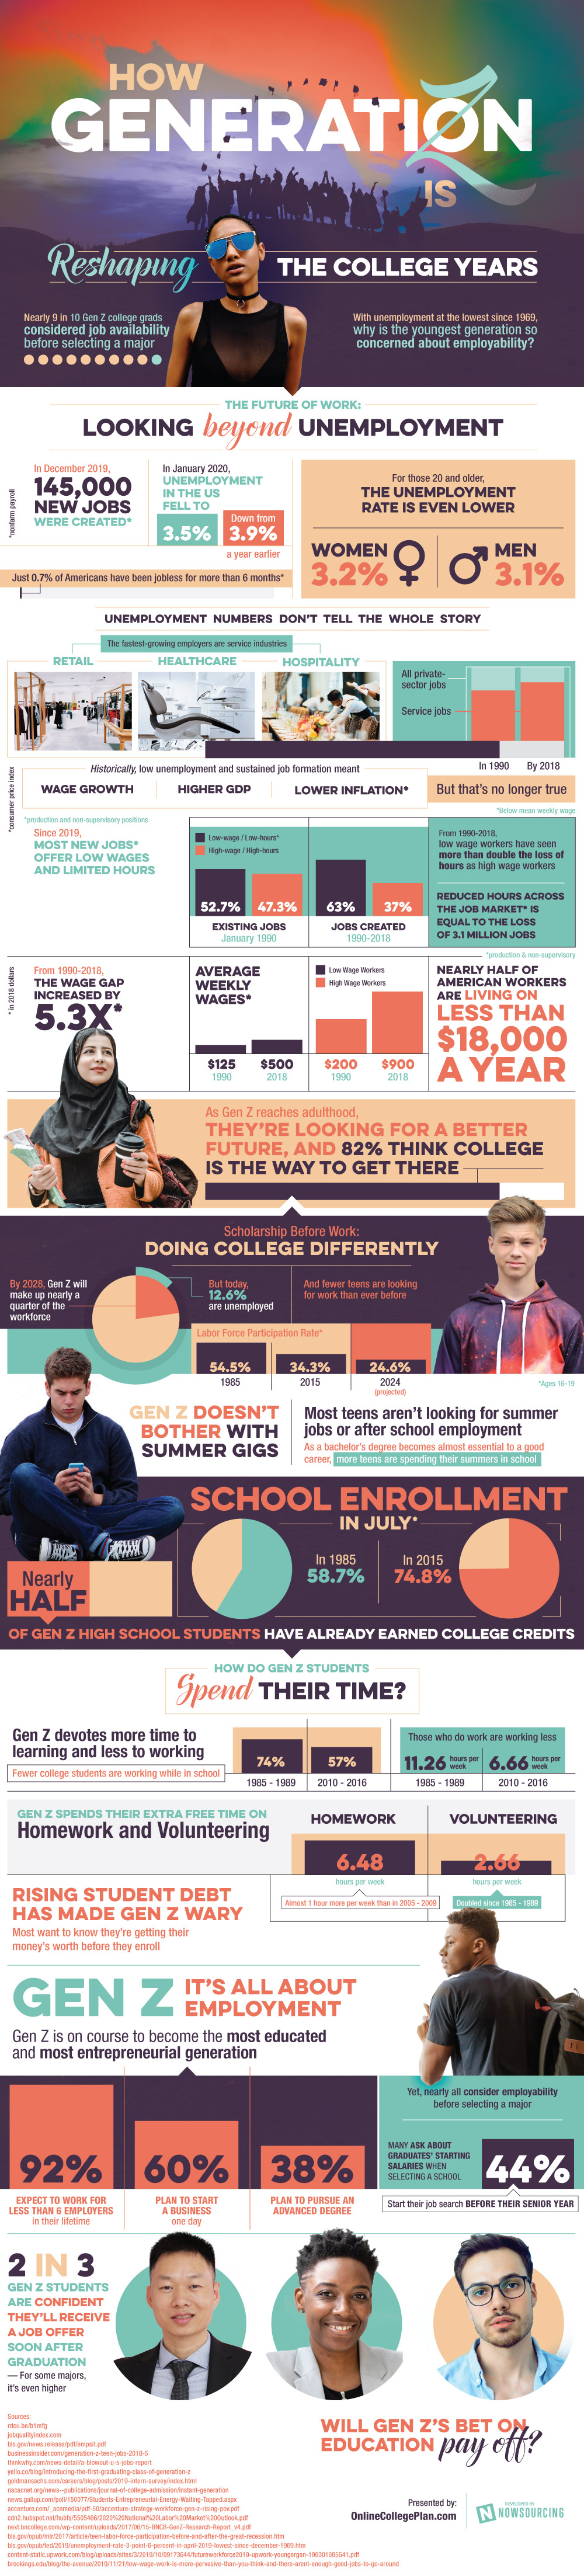 How GenZ Is Doing College and Careers Differently - Infographic